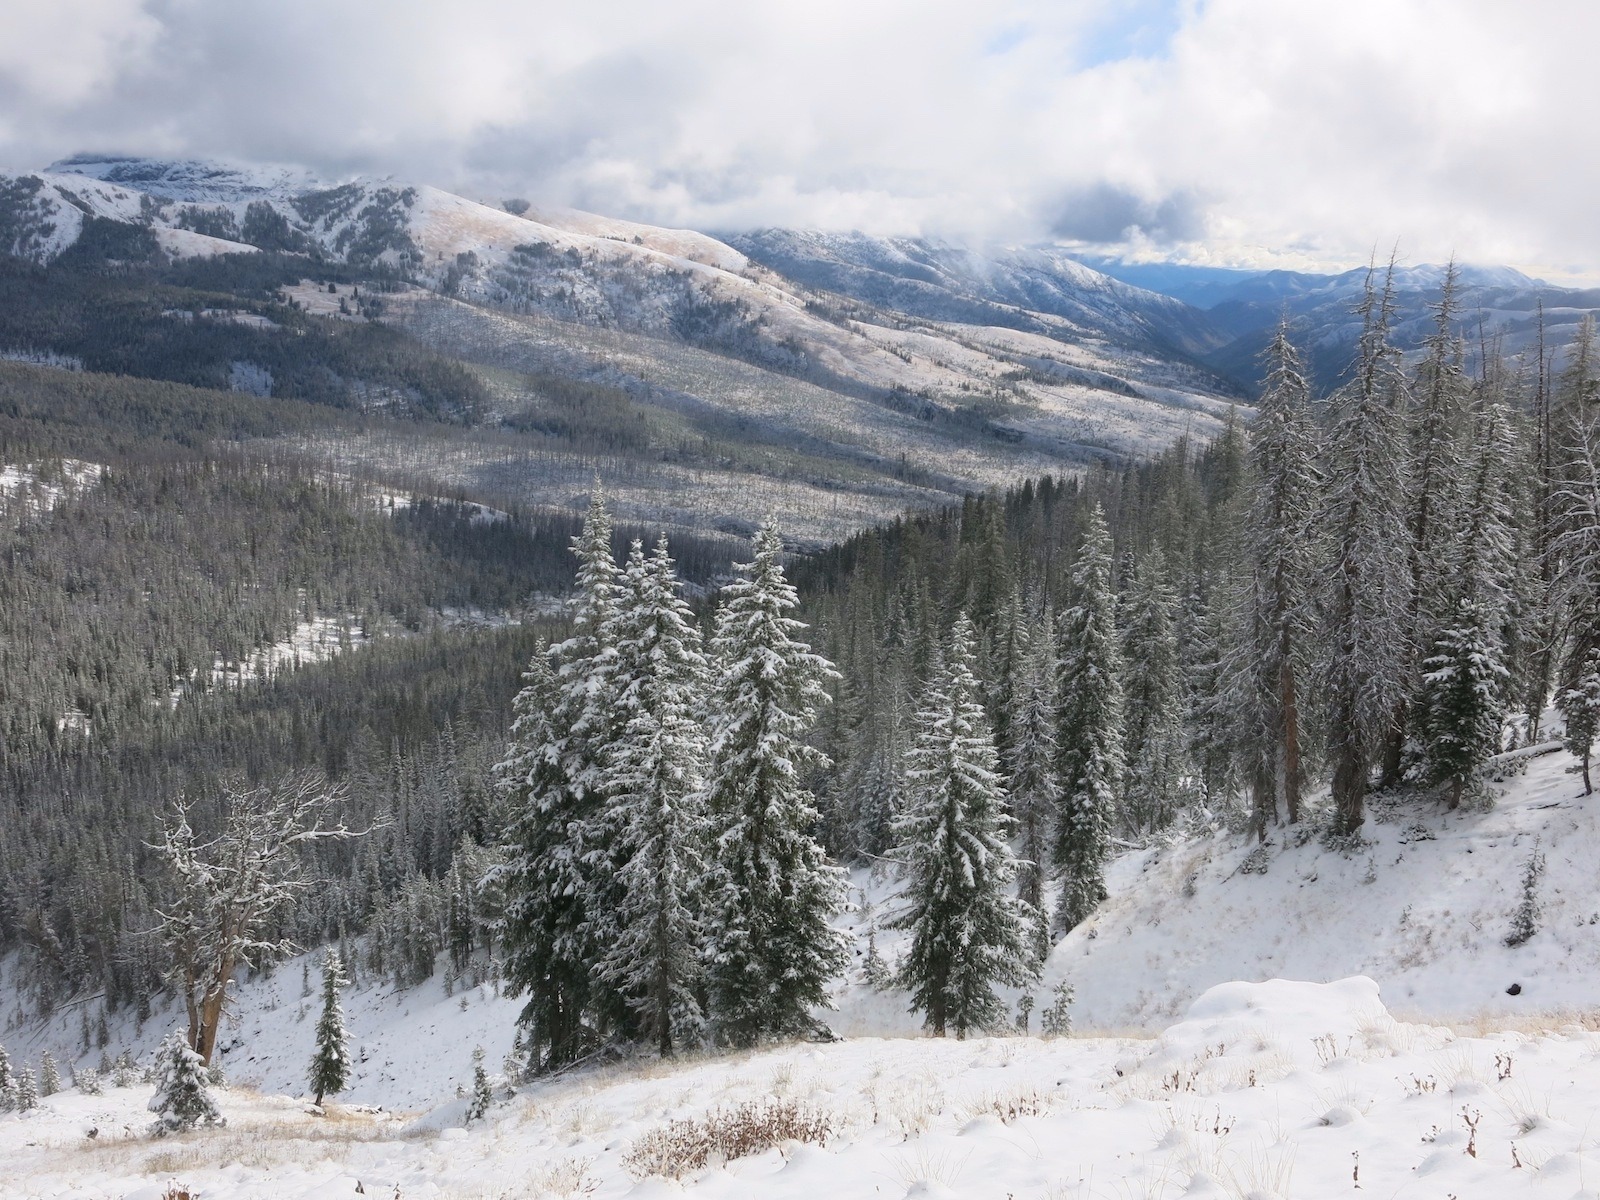 The North Absaroka Wilderness is powder wonderland for backcountry skiers and boarders.  While winter landscapes appear vacant and there for the leaving of tracks, Burritt encourages us to gain an ecological understanding of places we're entering. He reminds that they're home to something and likely barely getting by.  Photo by Todd Burritt